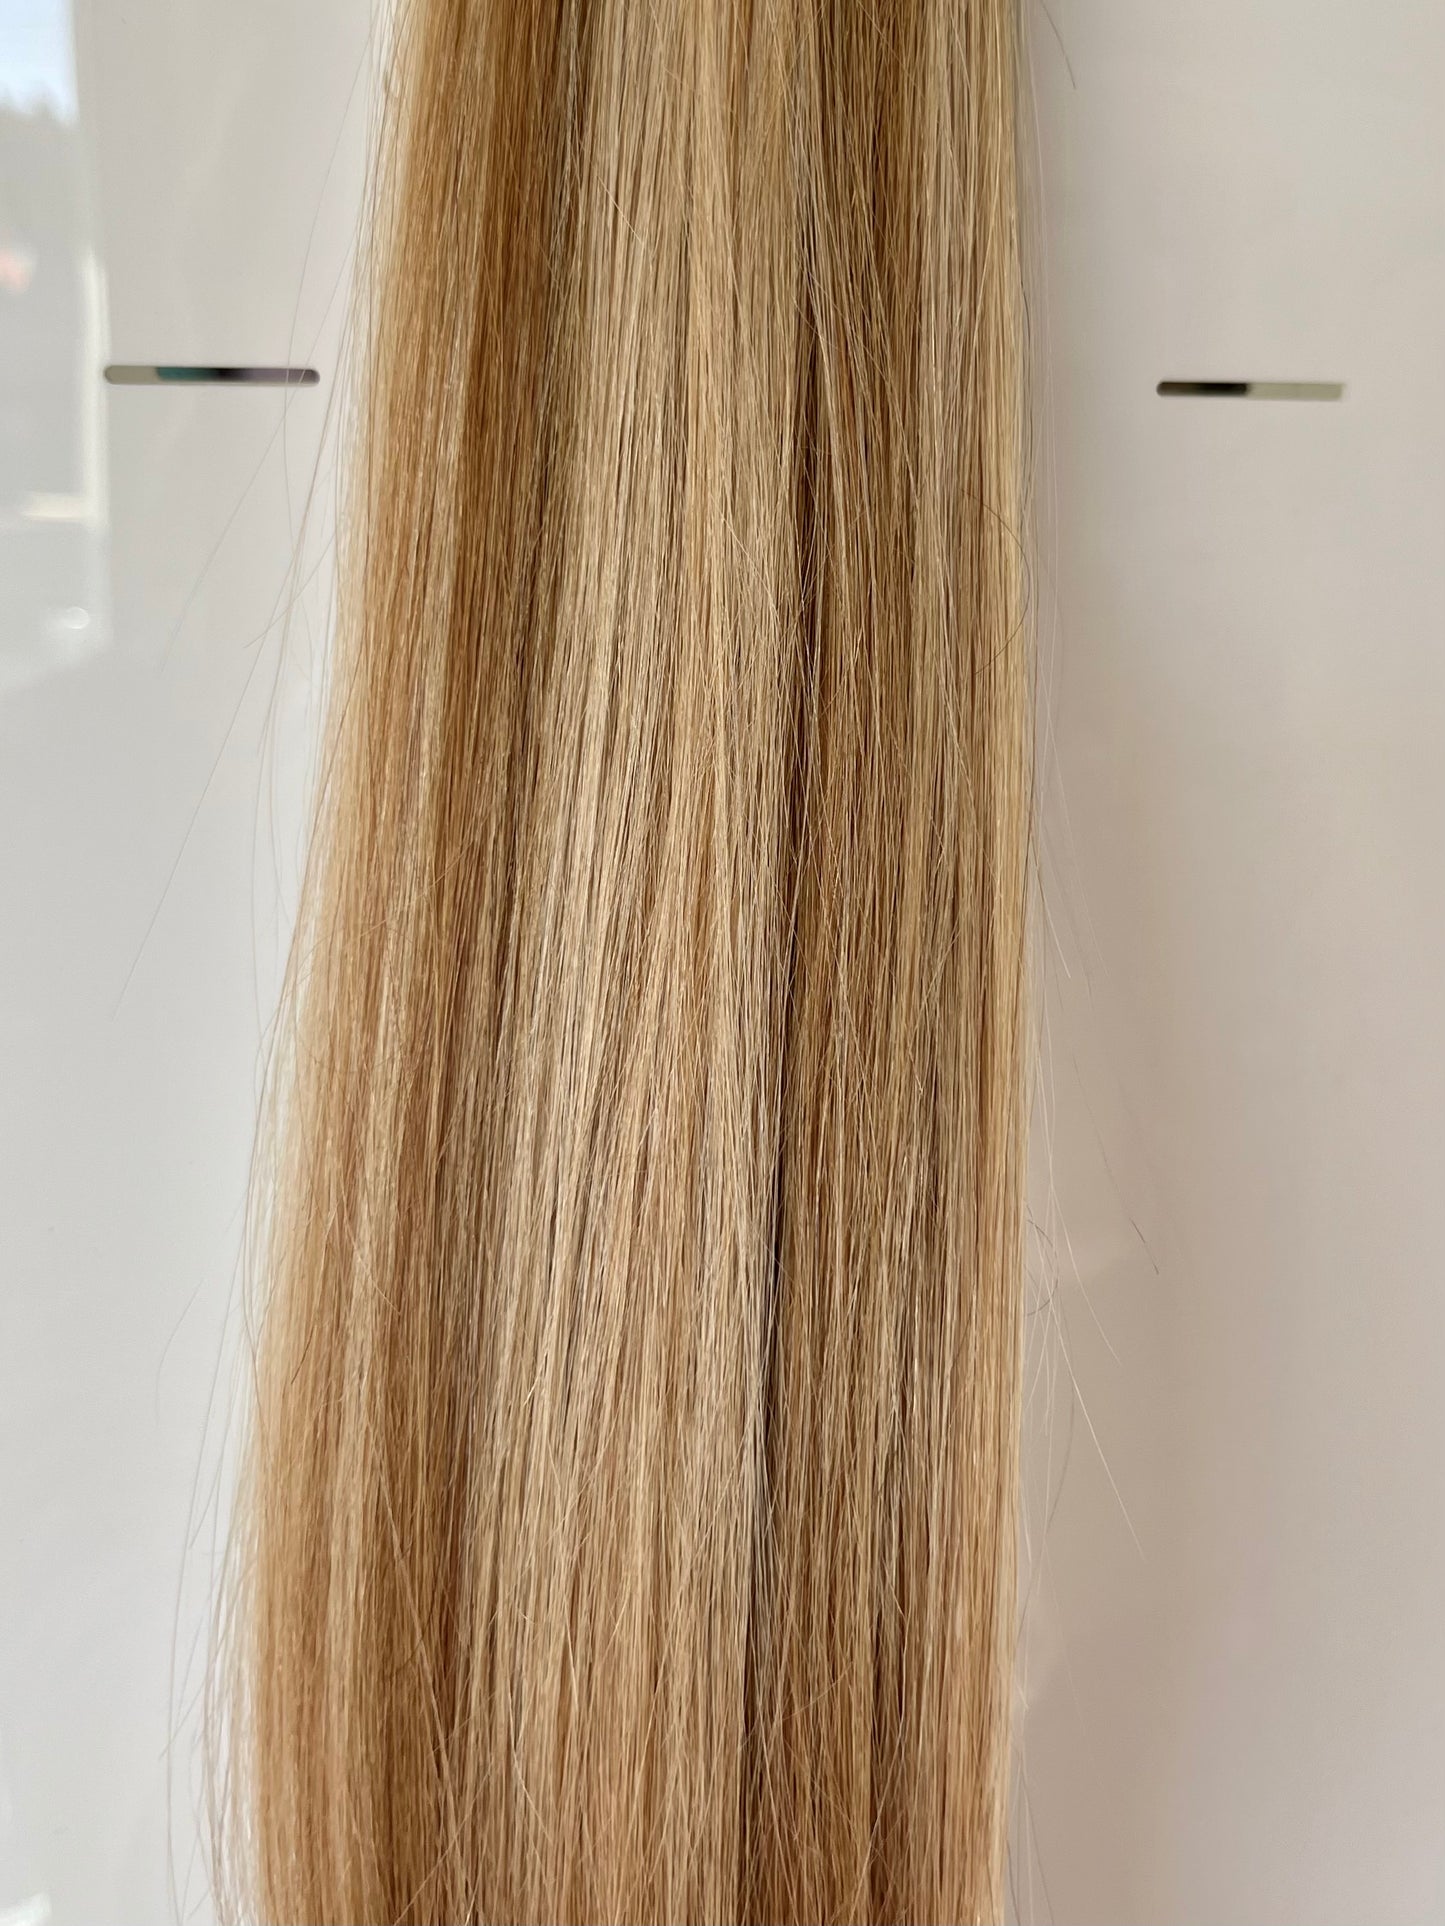 RETAIL TAPE IN EXTENSIONS - HIGHLIGHTED - PARISIAN BLONDE